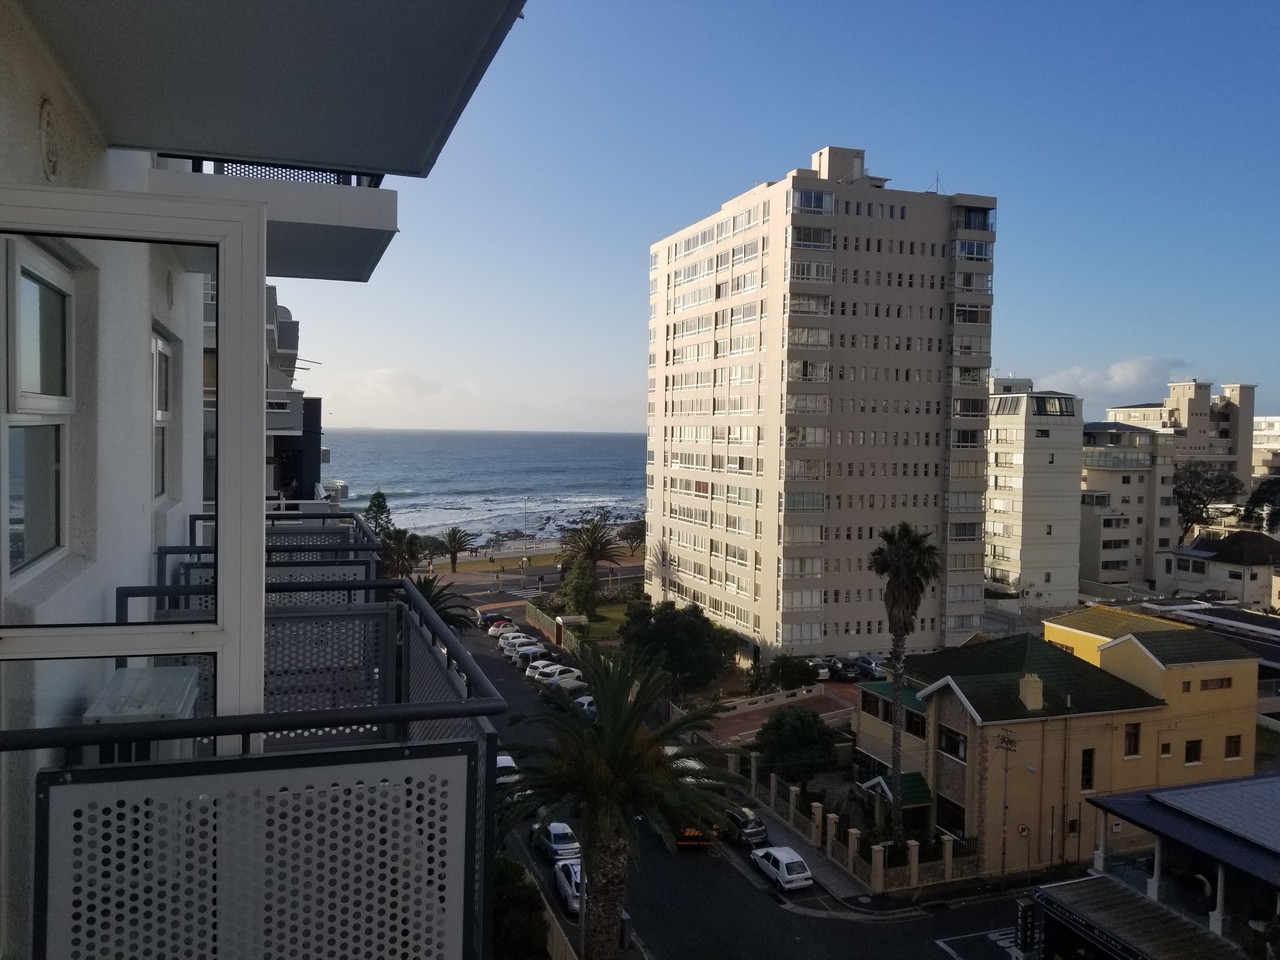 a view of a beach and buildings from a balcony